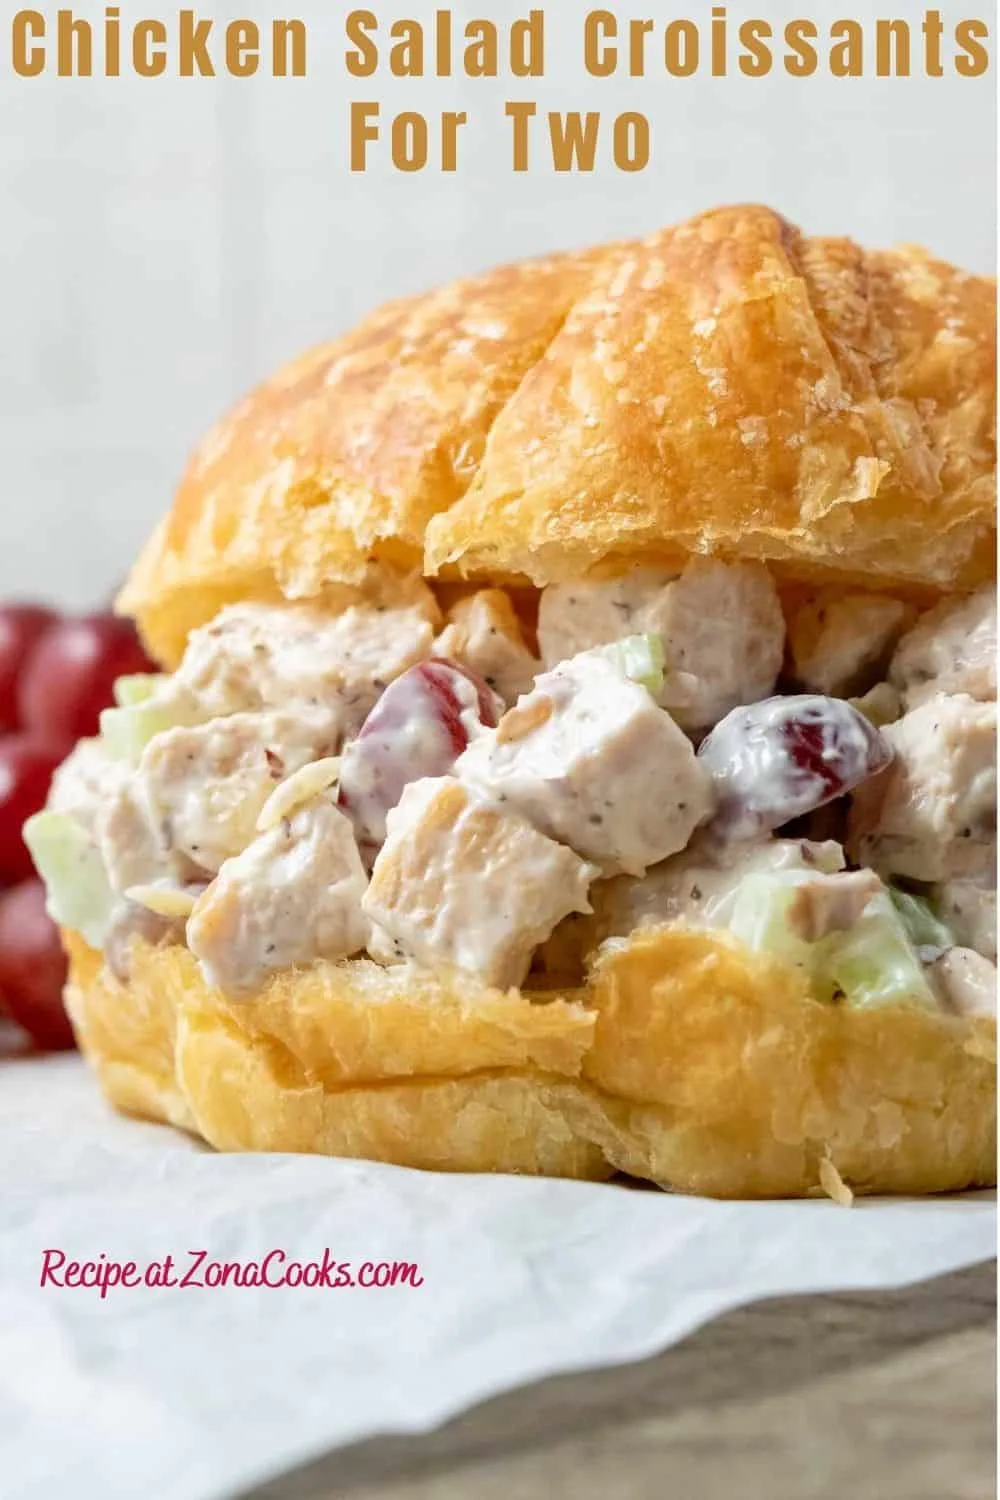 Chicken Salad Croissant with boneless chicken, grapes, almonds, and celery coated in a mayo dressing piled in large buttery croissant rolls and text reading chicken salad croissants for two recipe at zonacooks.com.